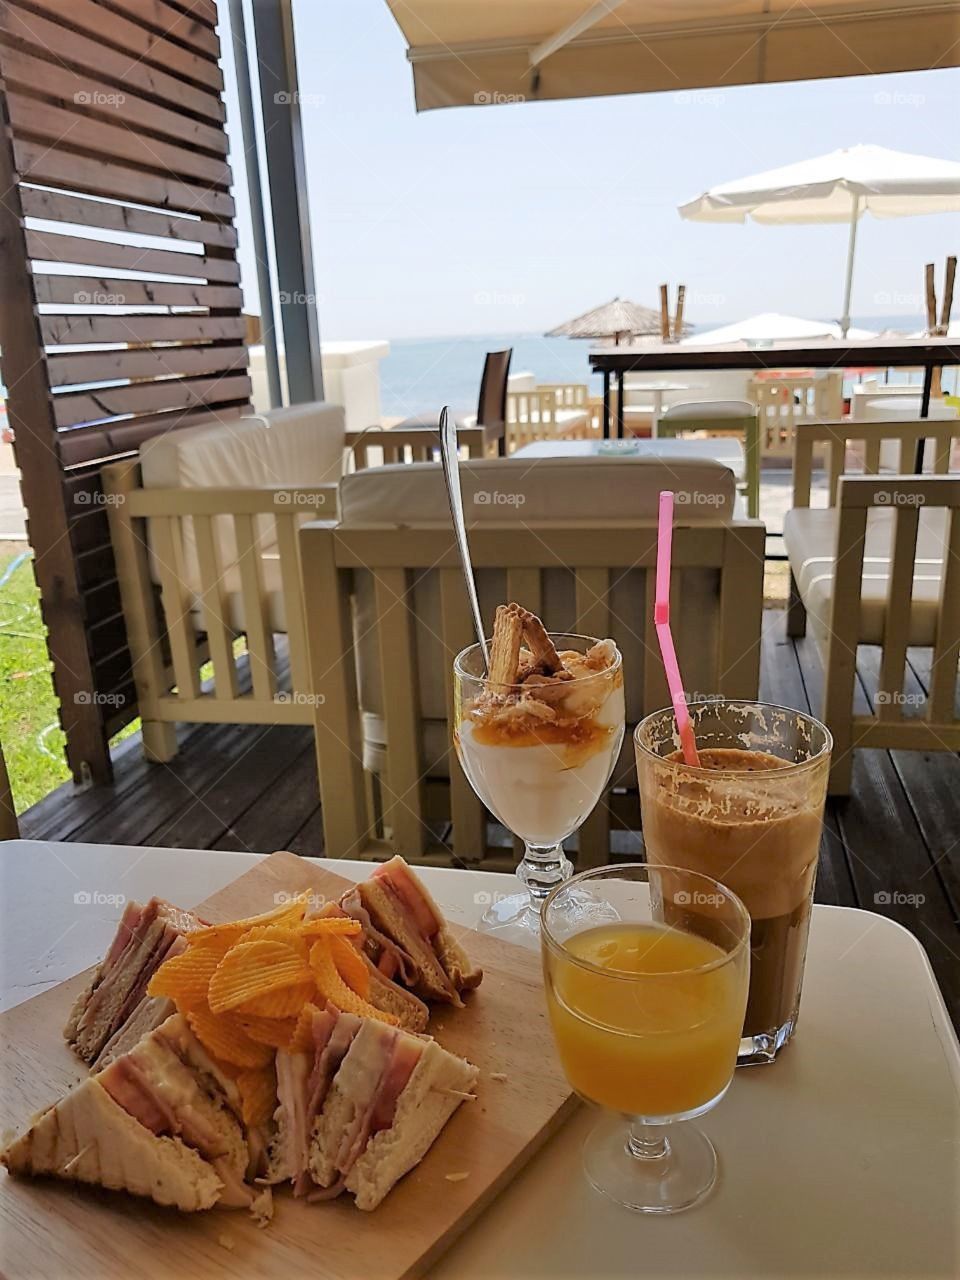 breakfast with coffee/frappé at the beach, Greece ☕